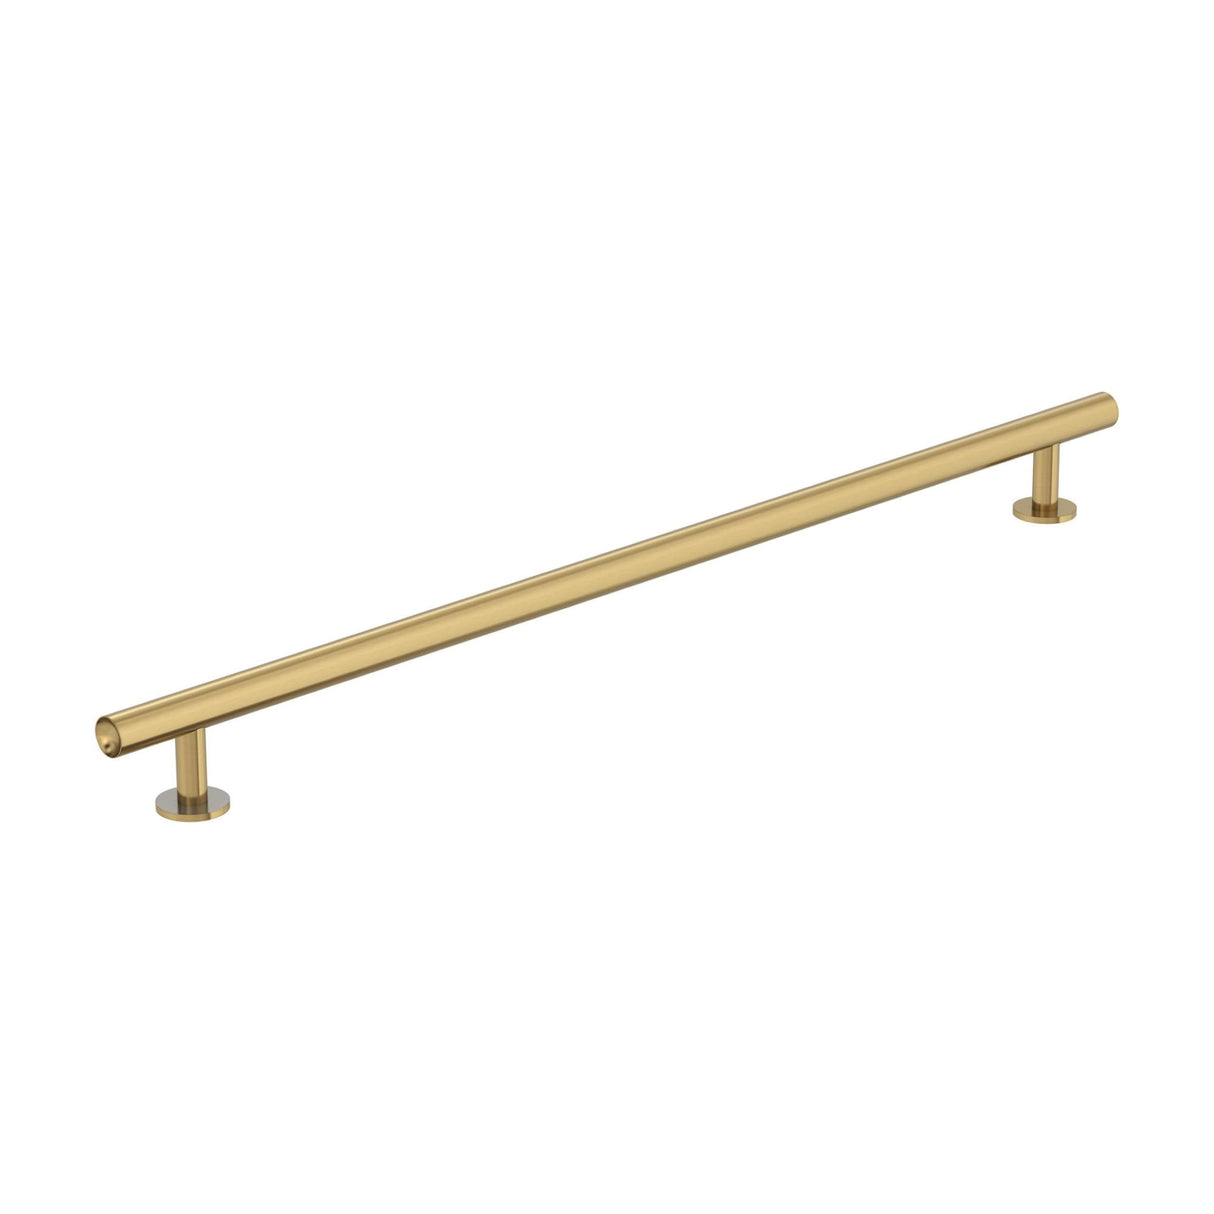 Amerock BP37391CZ Champagne Bronze Cabinet Pull 12-5/8 in (320 mm) Center-to-Center Cabinet Handle Radius Drawer Pull Kitchen Cabinet Handle Furniture Hardware